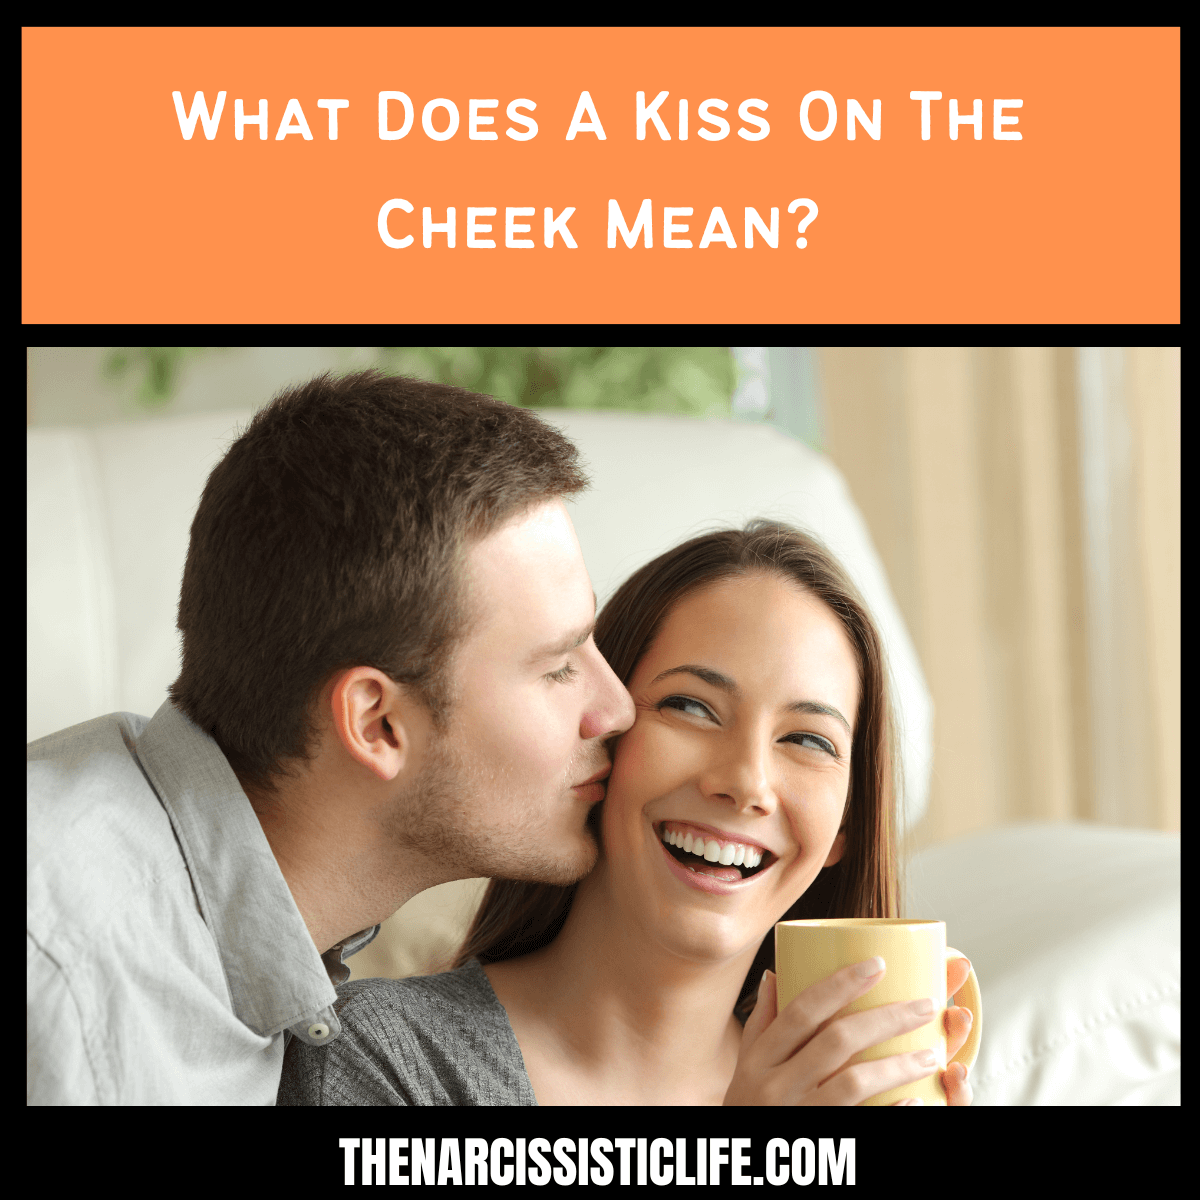 What Does A Kiss On The Cheek Mean?